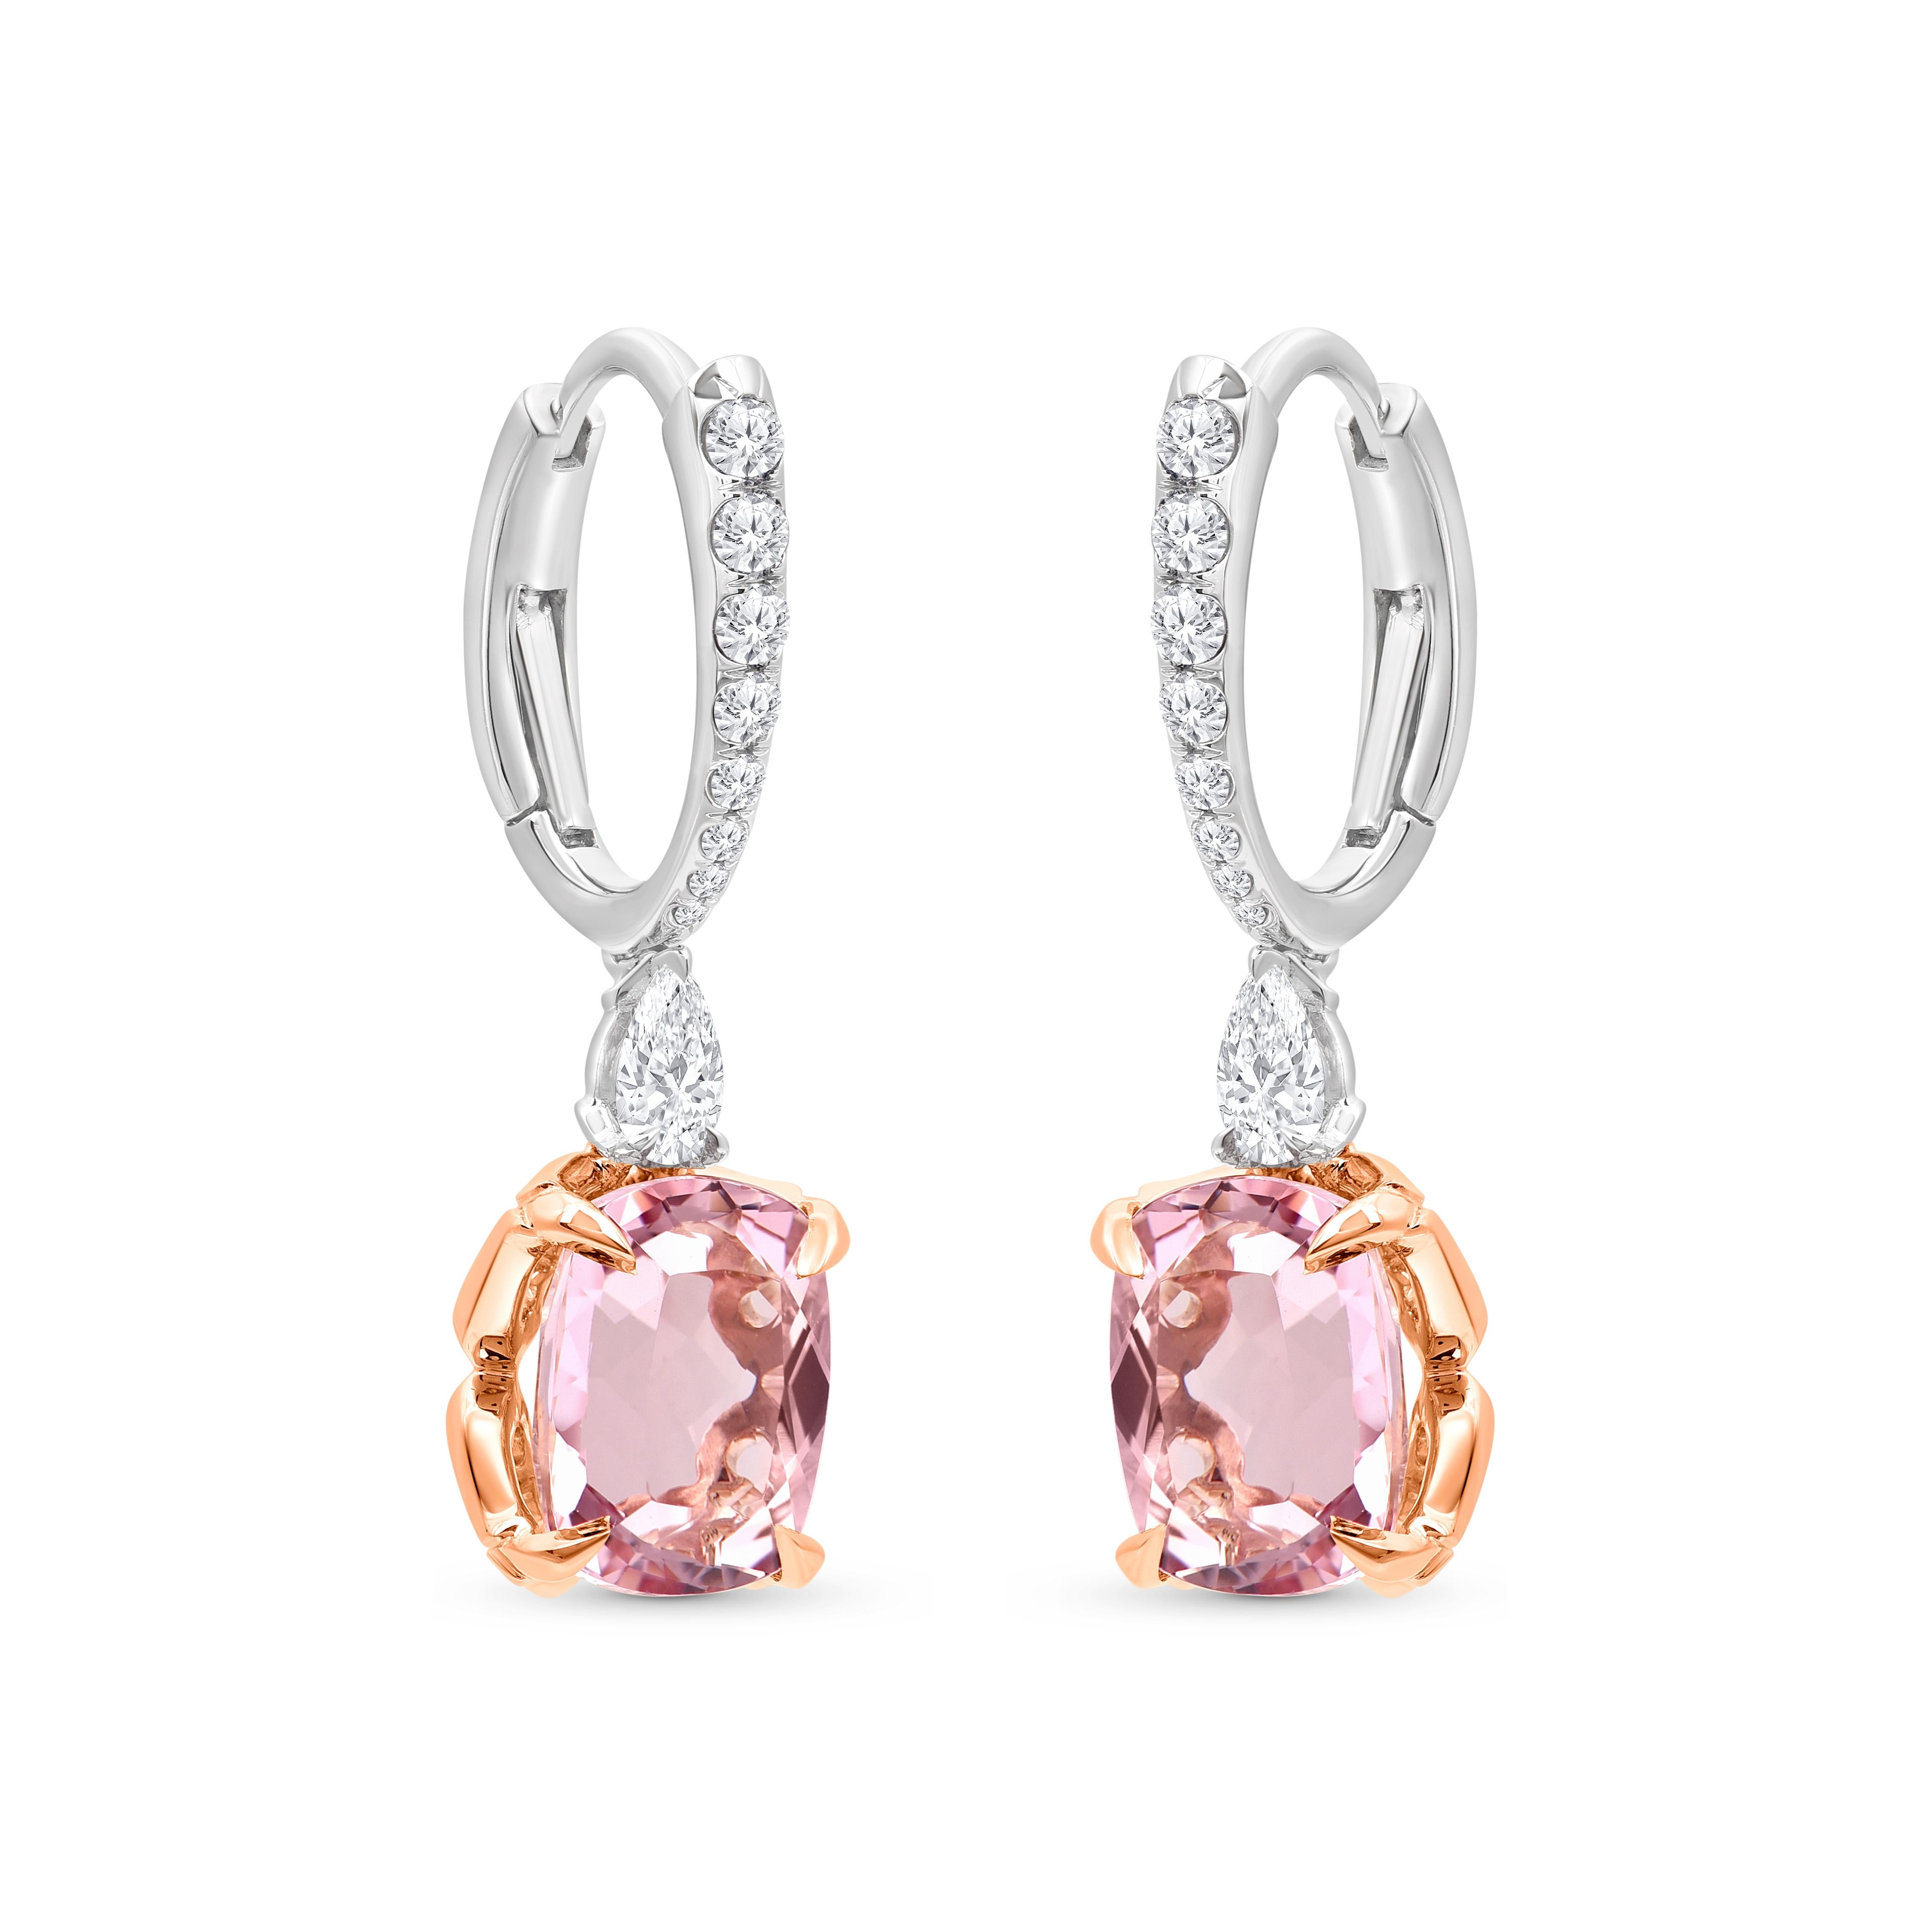 Inspired by the JOY of experiencing a gushing waterfall, these exquisite and elegant dangling earrings from the Cascade Collection are studded with 2  pear-cut diamonds, 16 brilliant round-cut diamonds and 2 cushion-cut morganite dripping